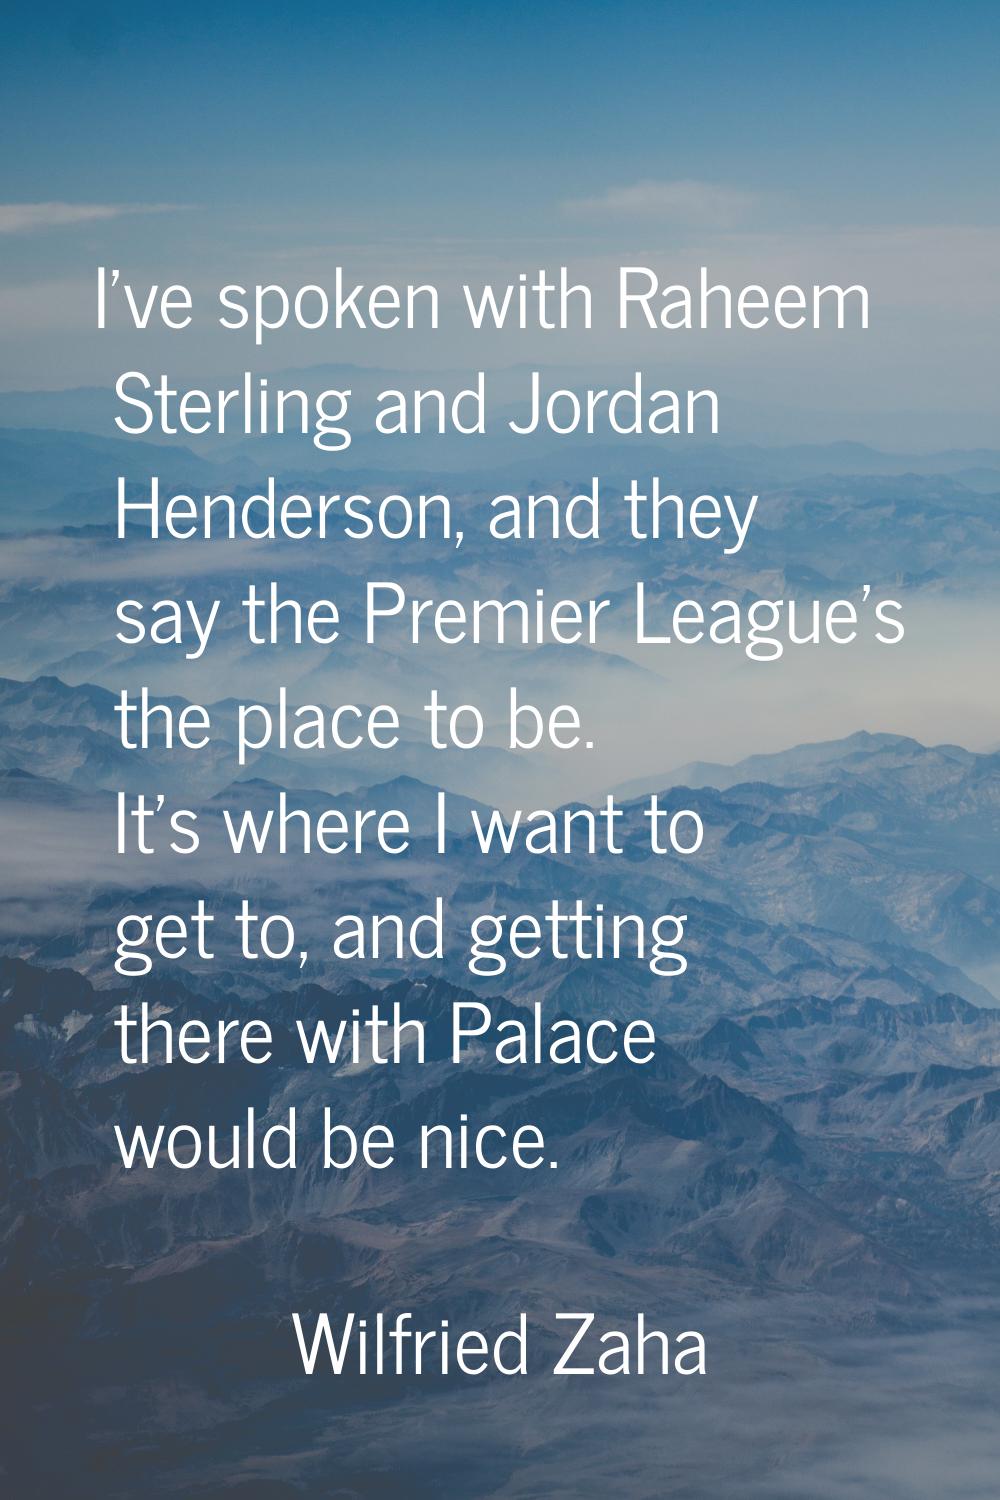 I've spoken with Raheem Sterling and Jordan Henderson, and they say the Premier League's the place 